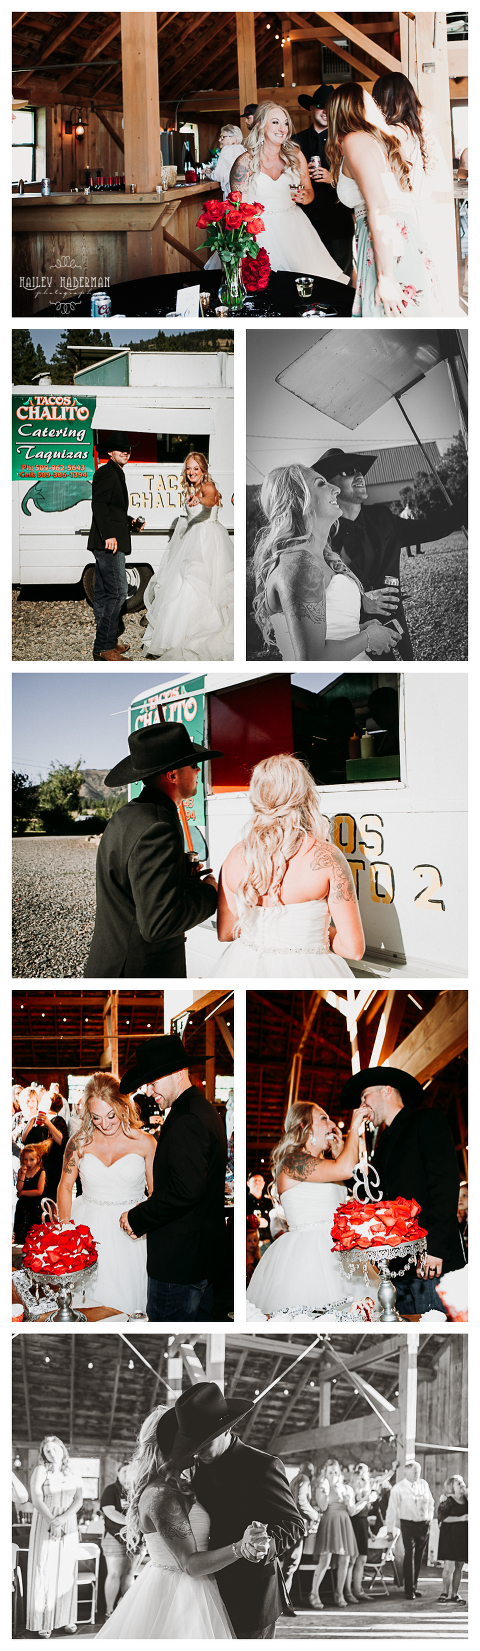 reception details,Ryan and Amber married at The Cattle barn in Cle Elum, WA, photographed by Hailey Haberman Ellensburg Wedding Photographer